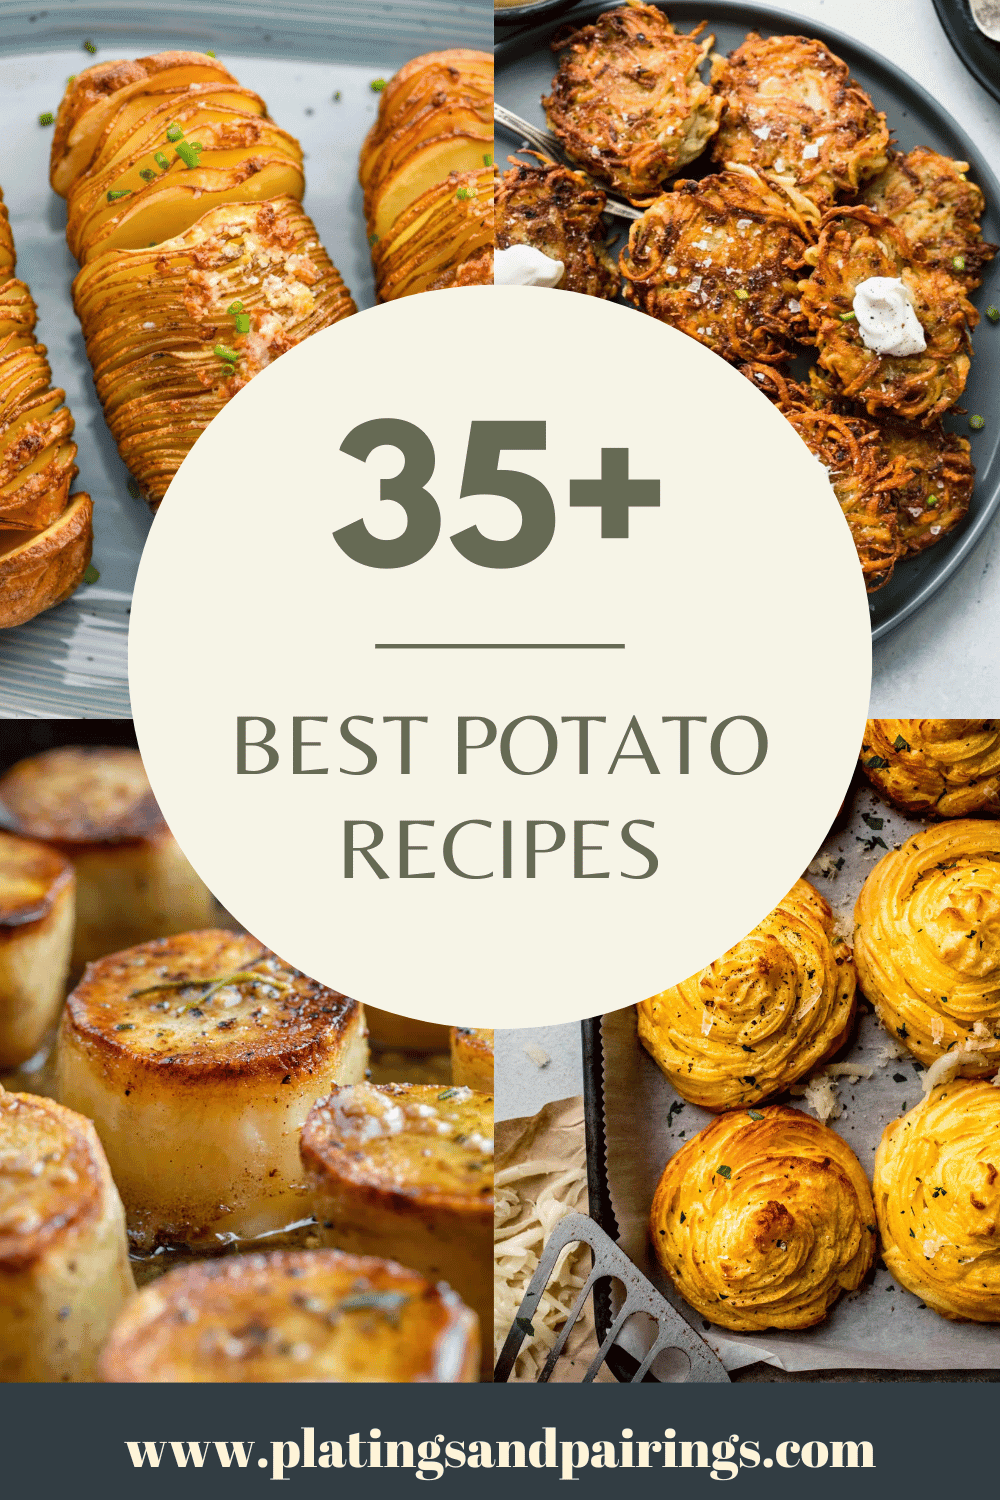 COLLAGE OF POTATO RECIPES WITH TEXT OVERLAY.